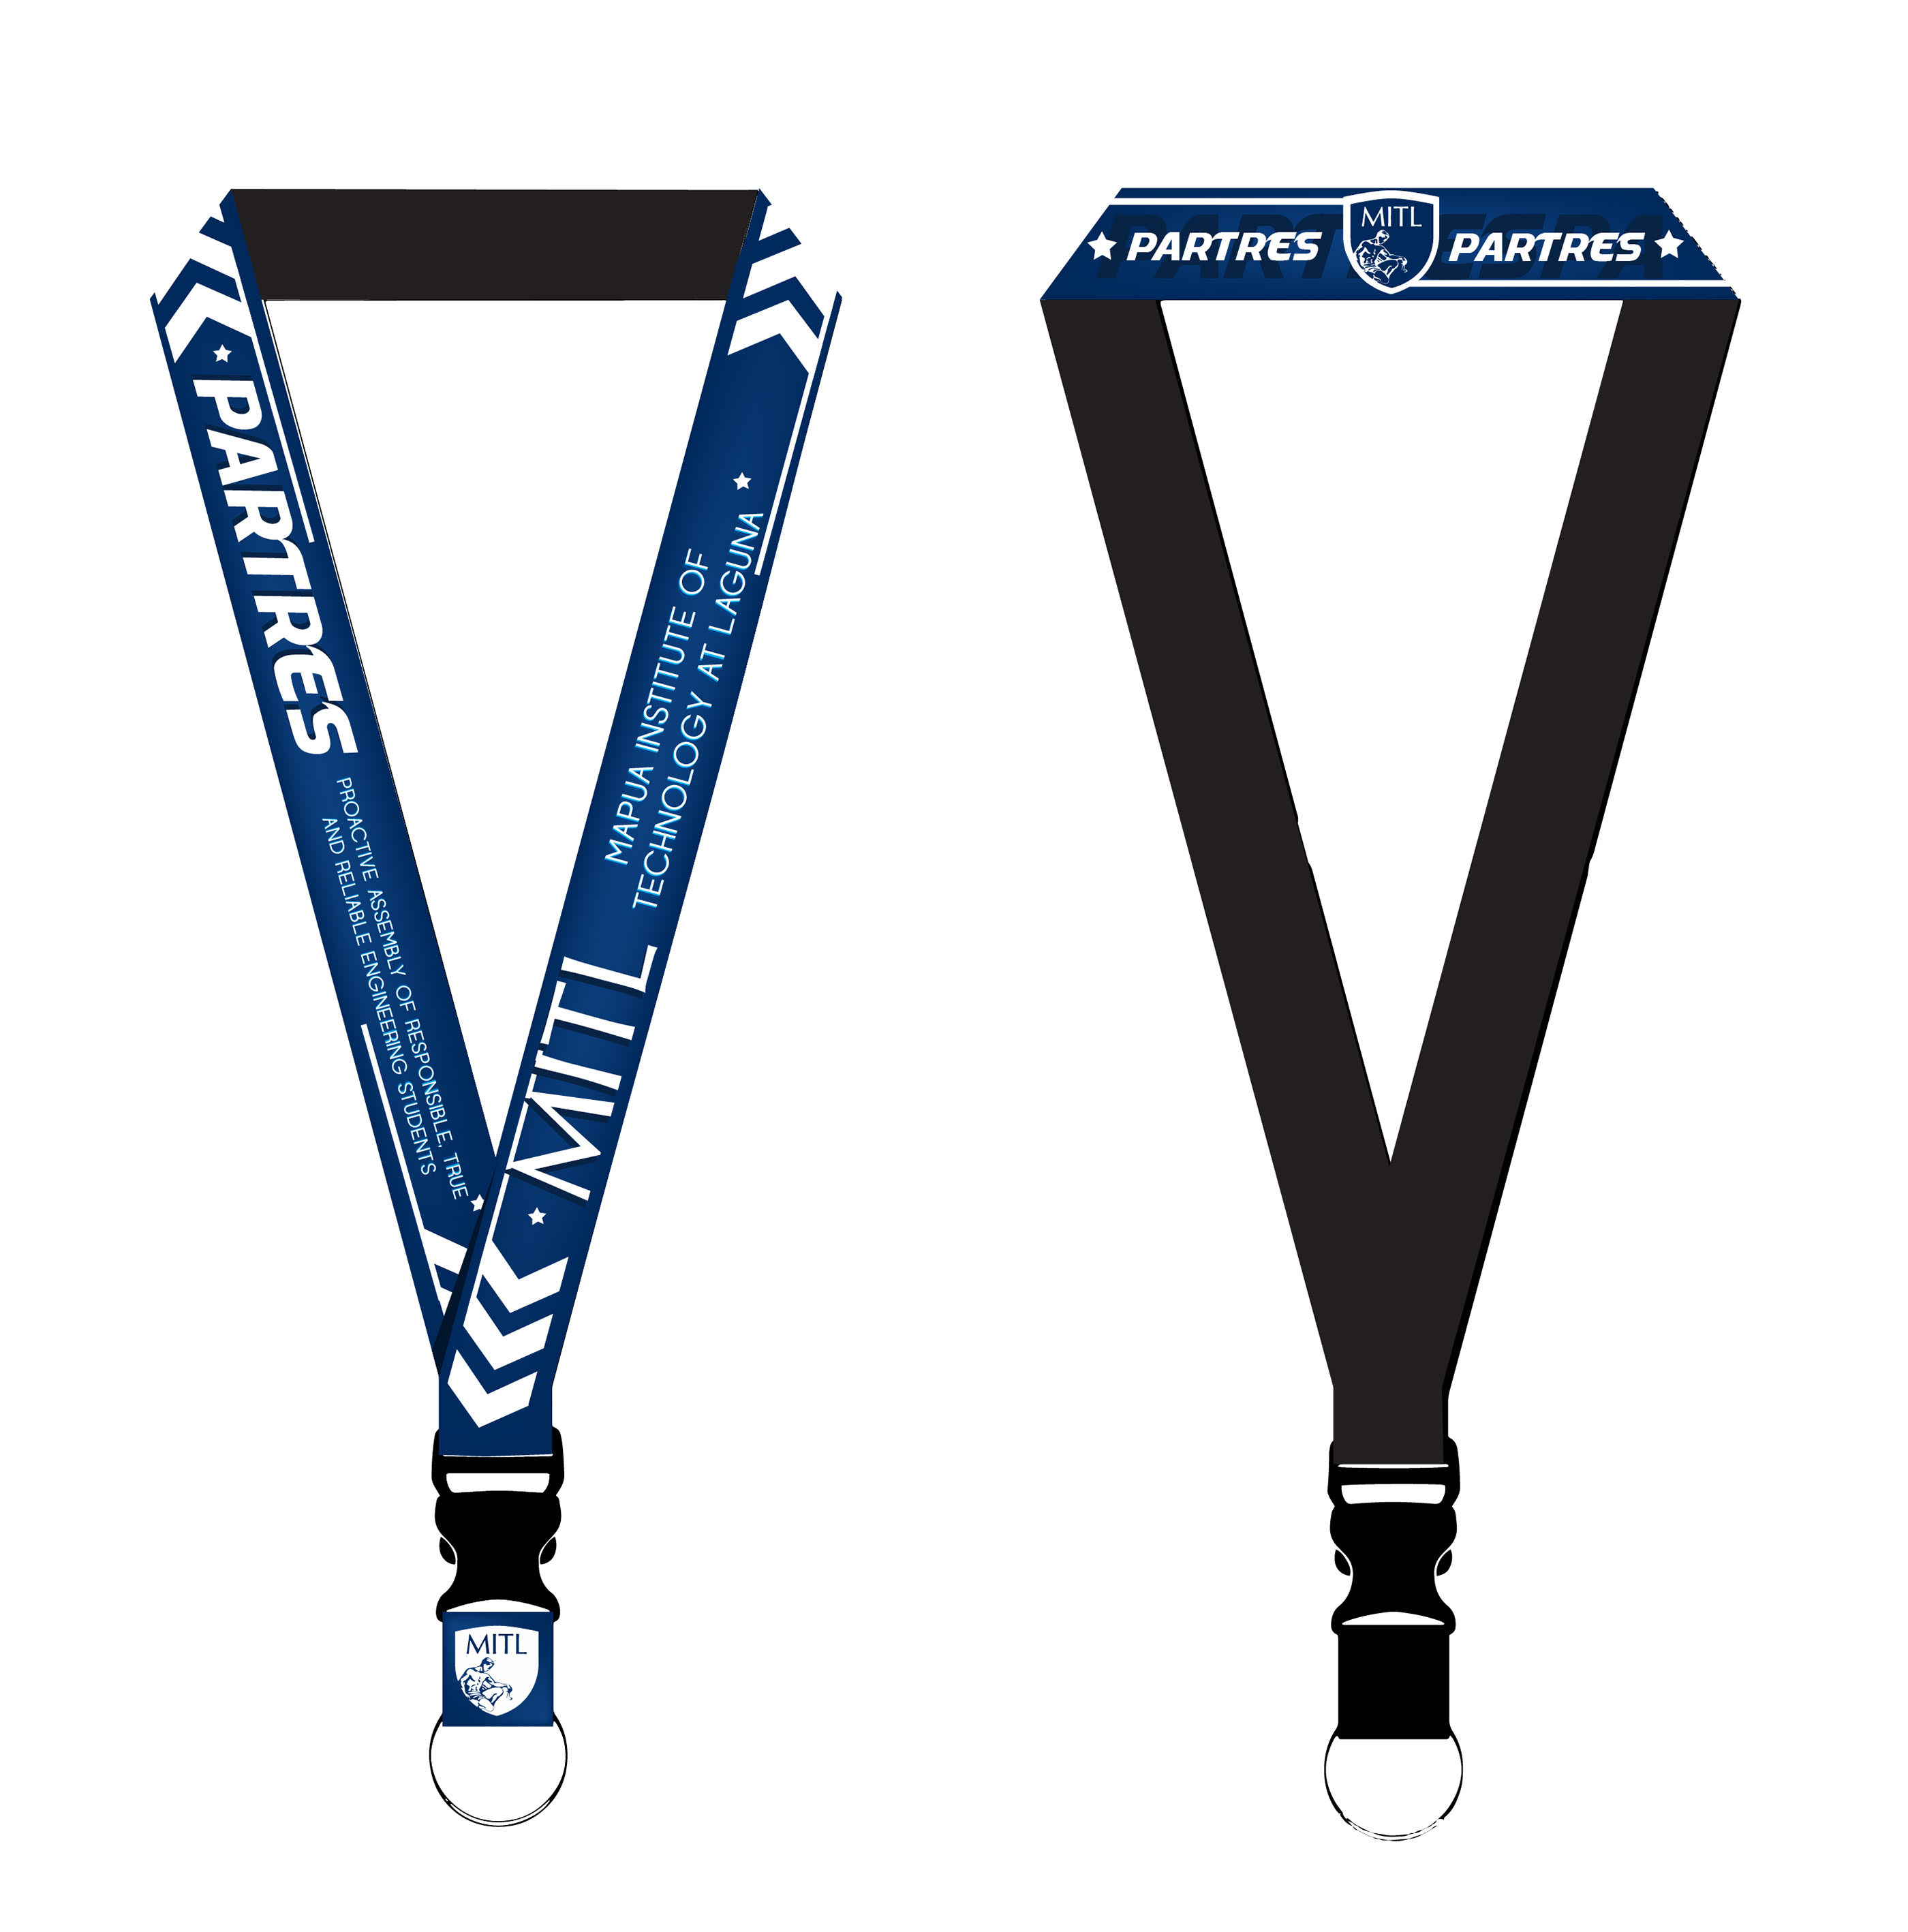 ID Lanyard lay out for PARTRES Malayan group organization. | Behance